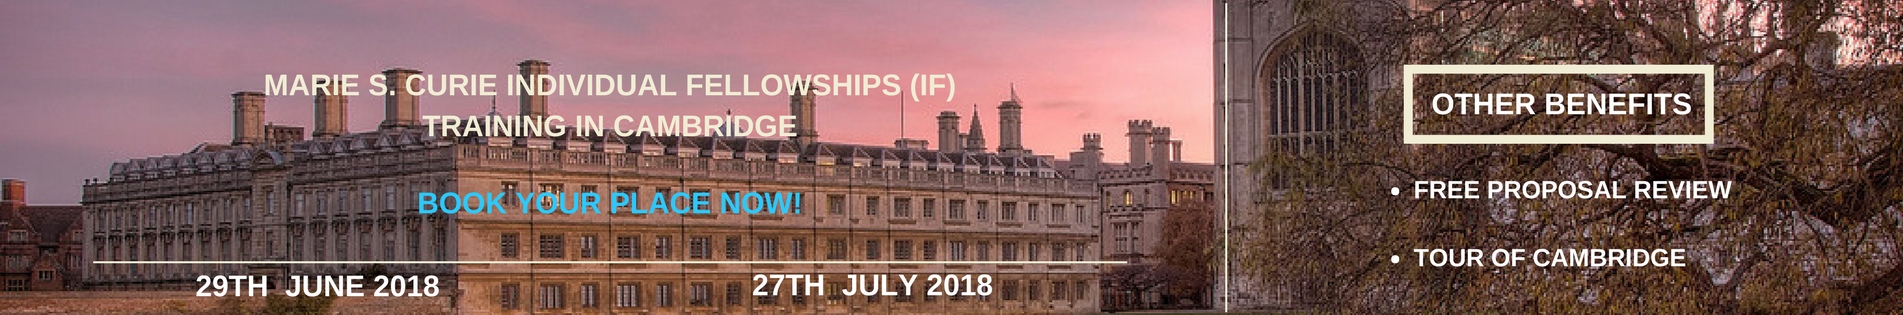 Event: Marie S. Curie Individual Fellowships Training in Cambridge